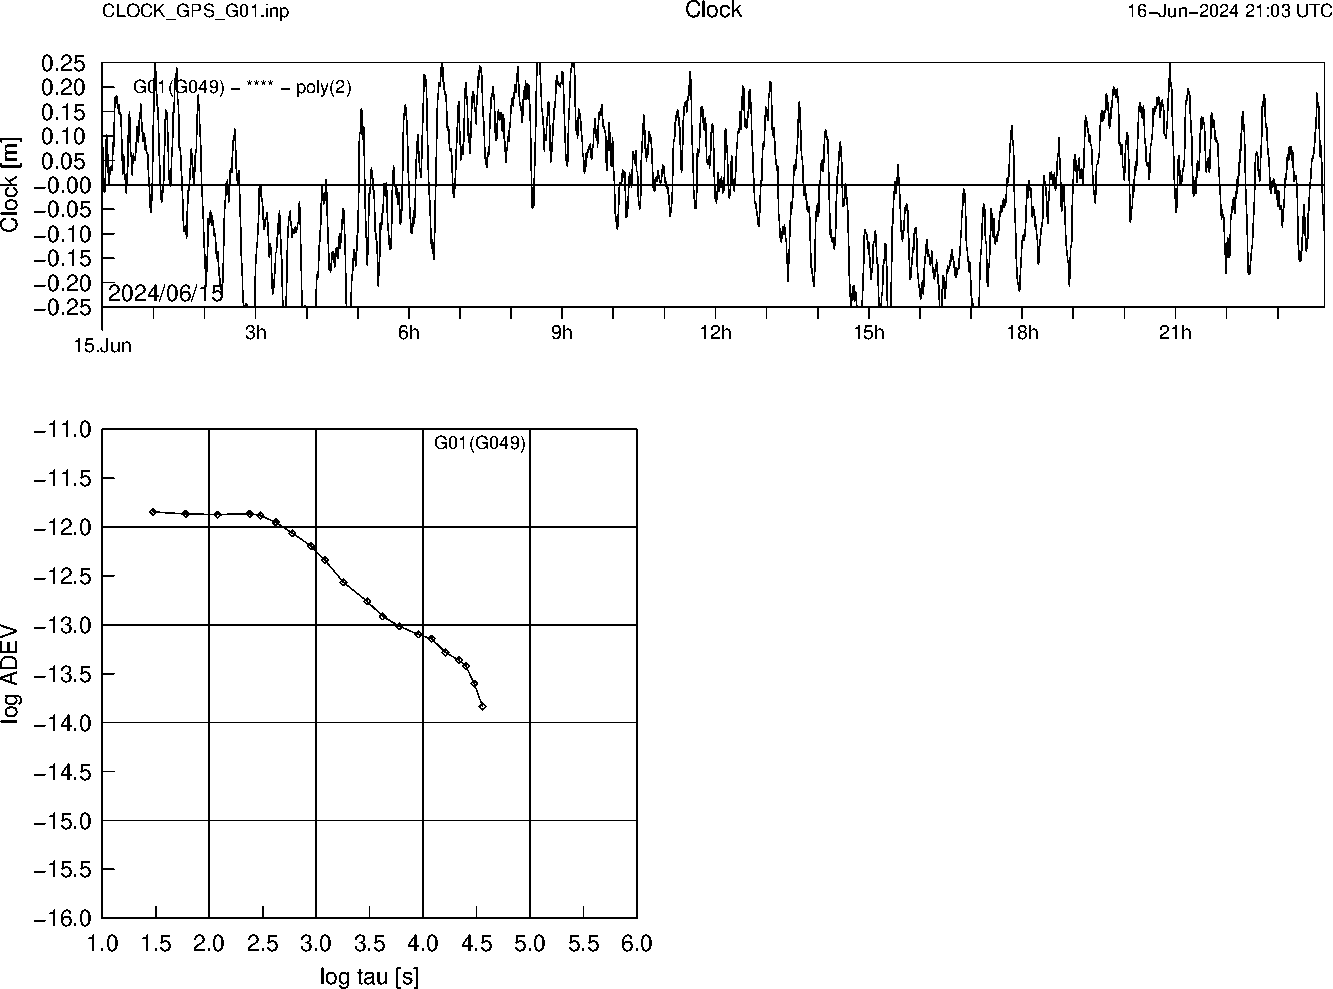 GPS G01 Clock Time Series and Allan Deviation